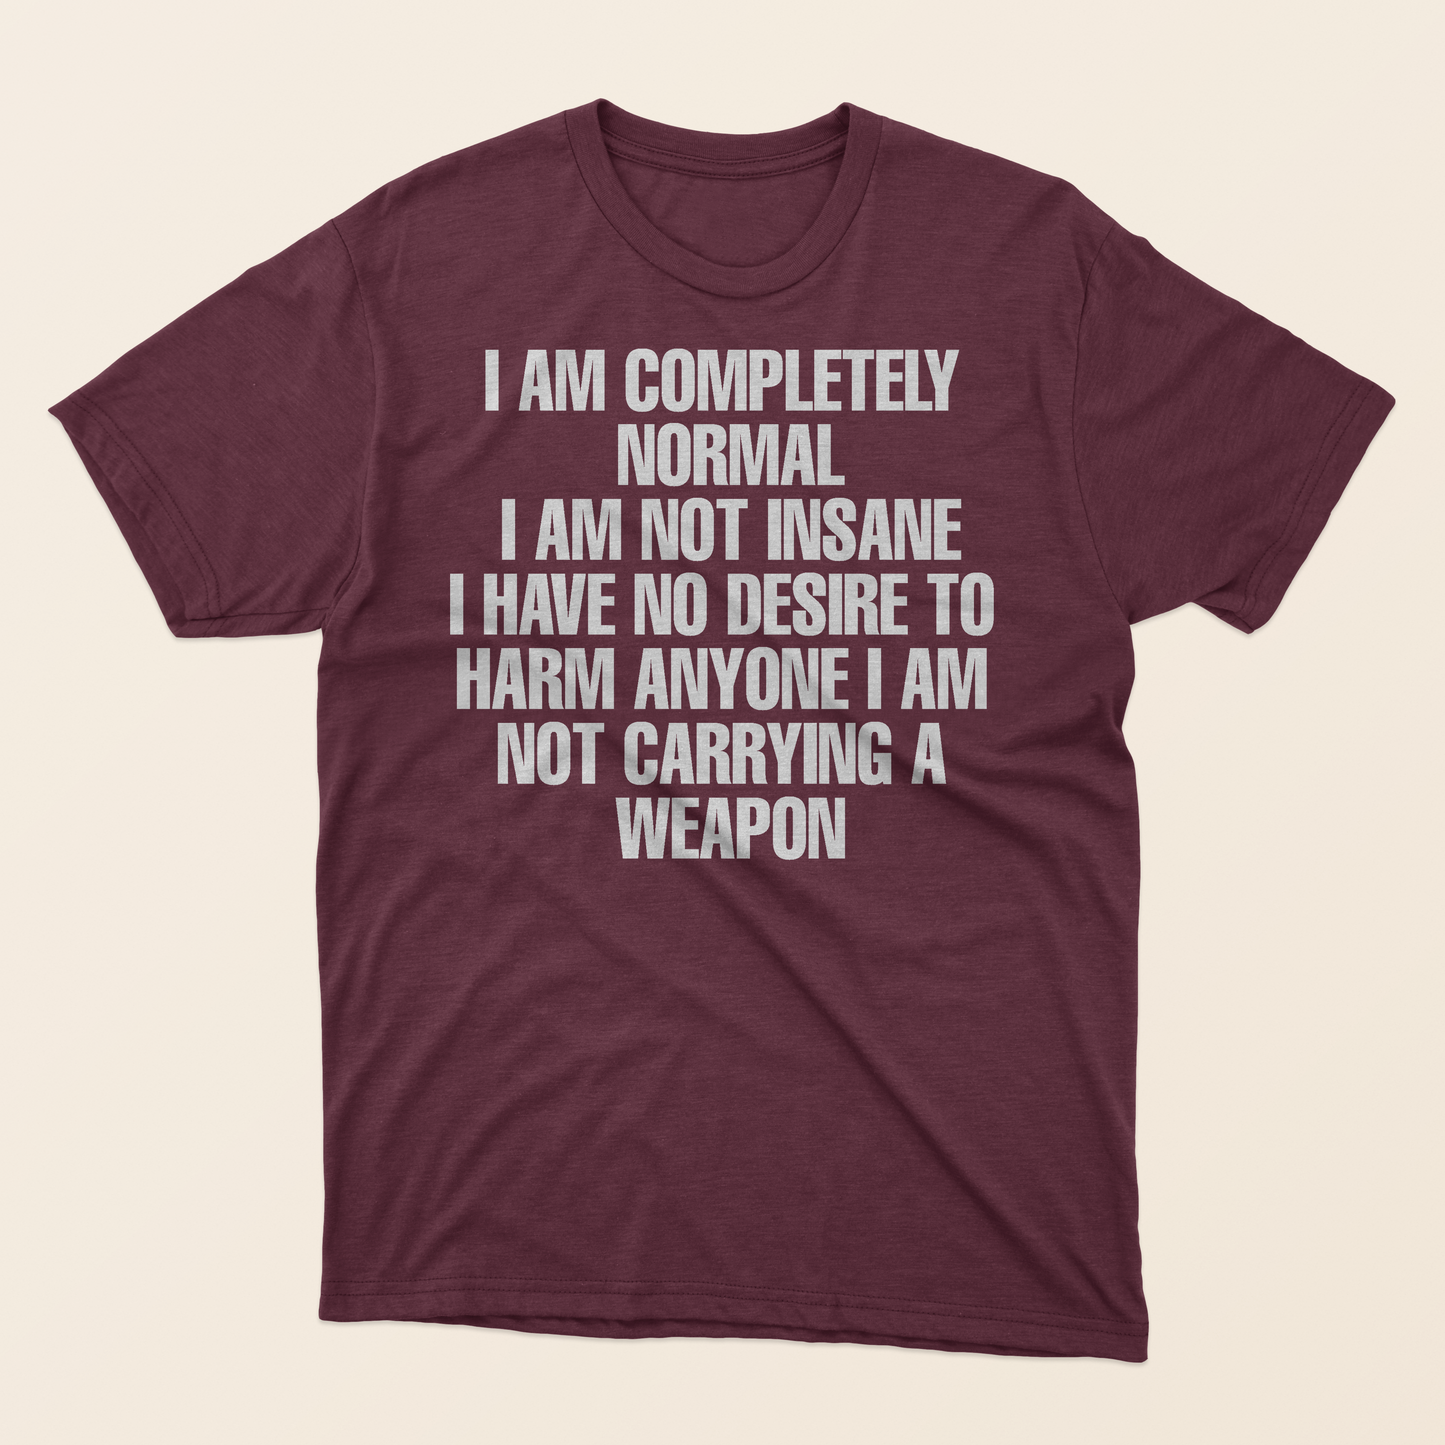 "I Am Completely Normal" - Unisex Tee